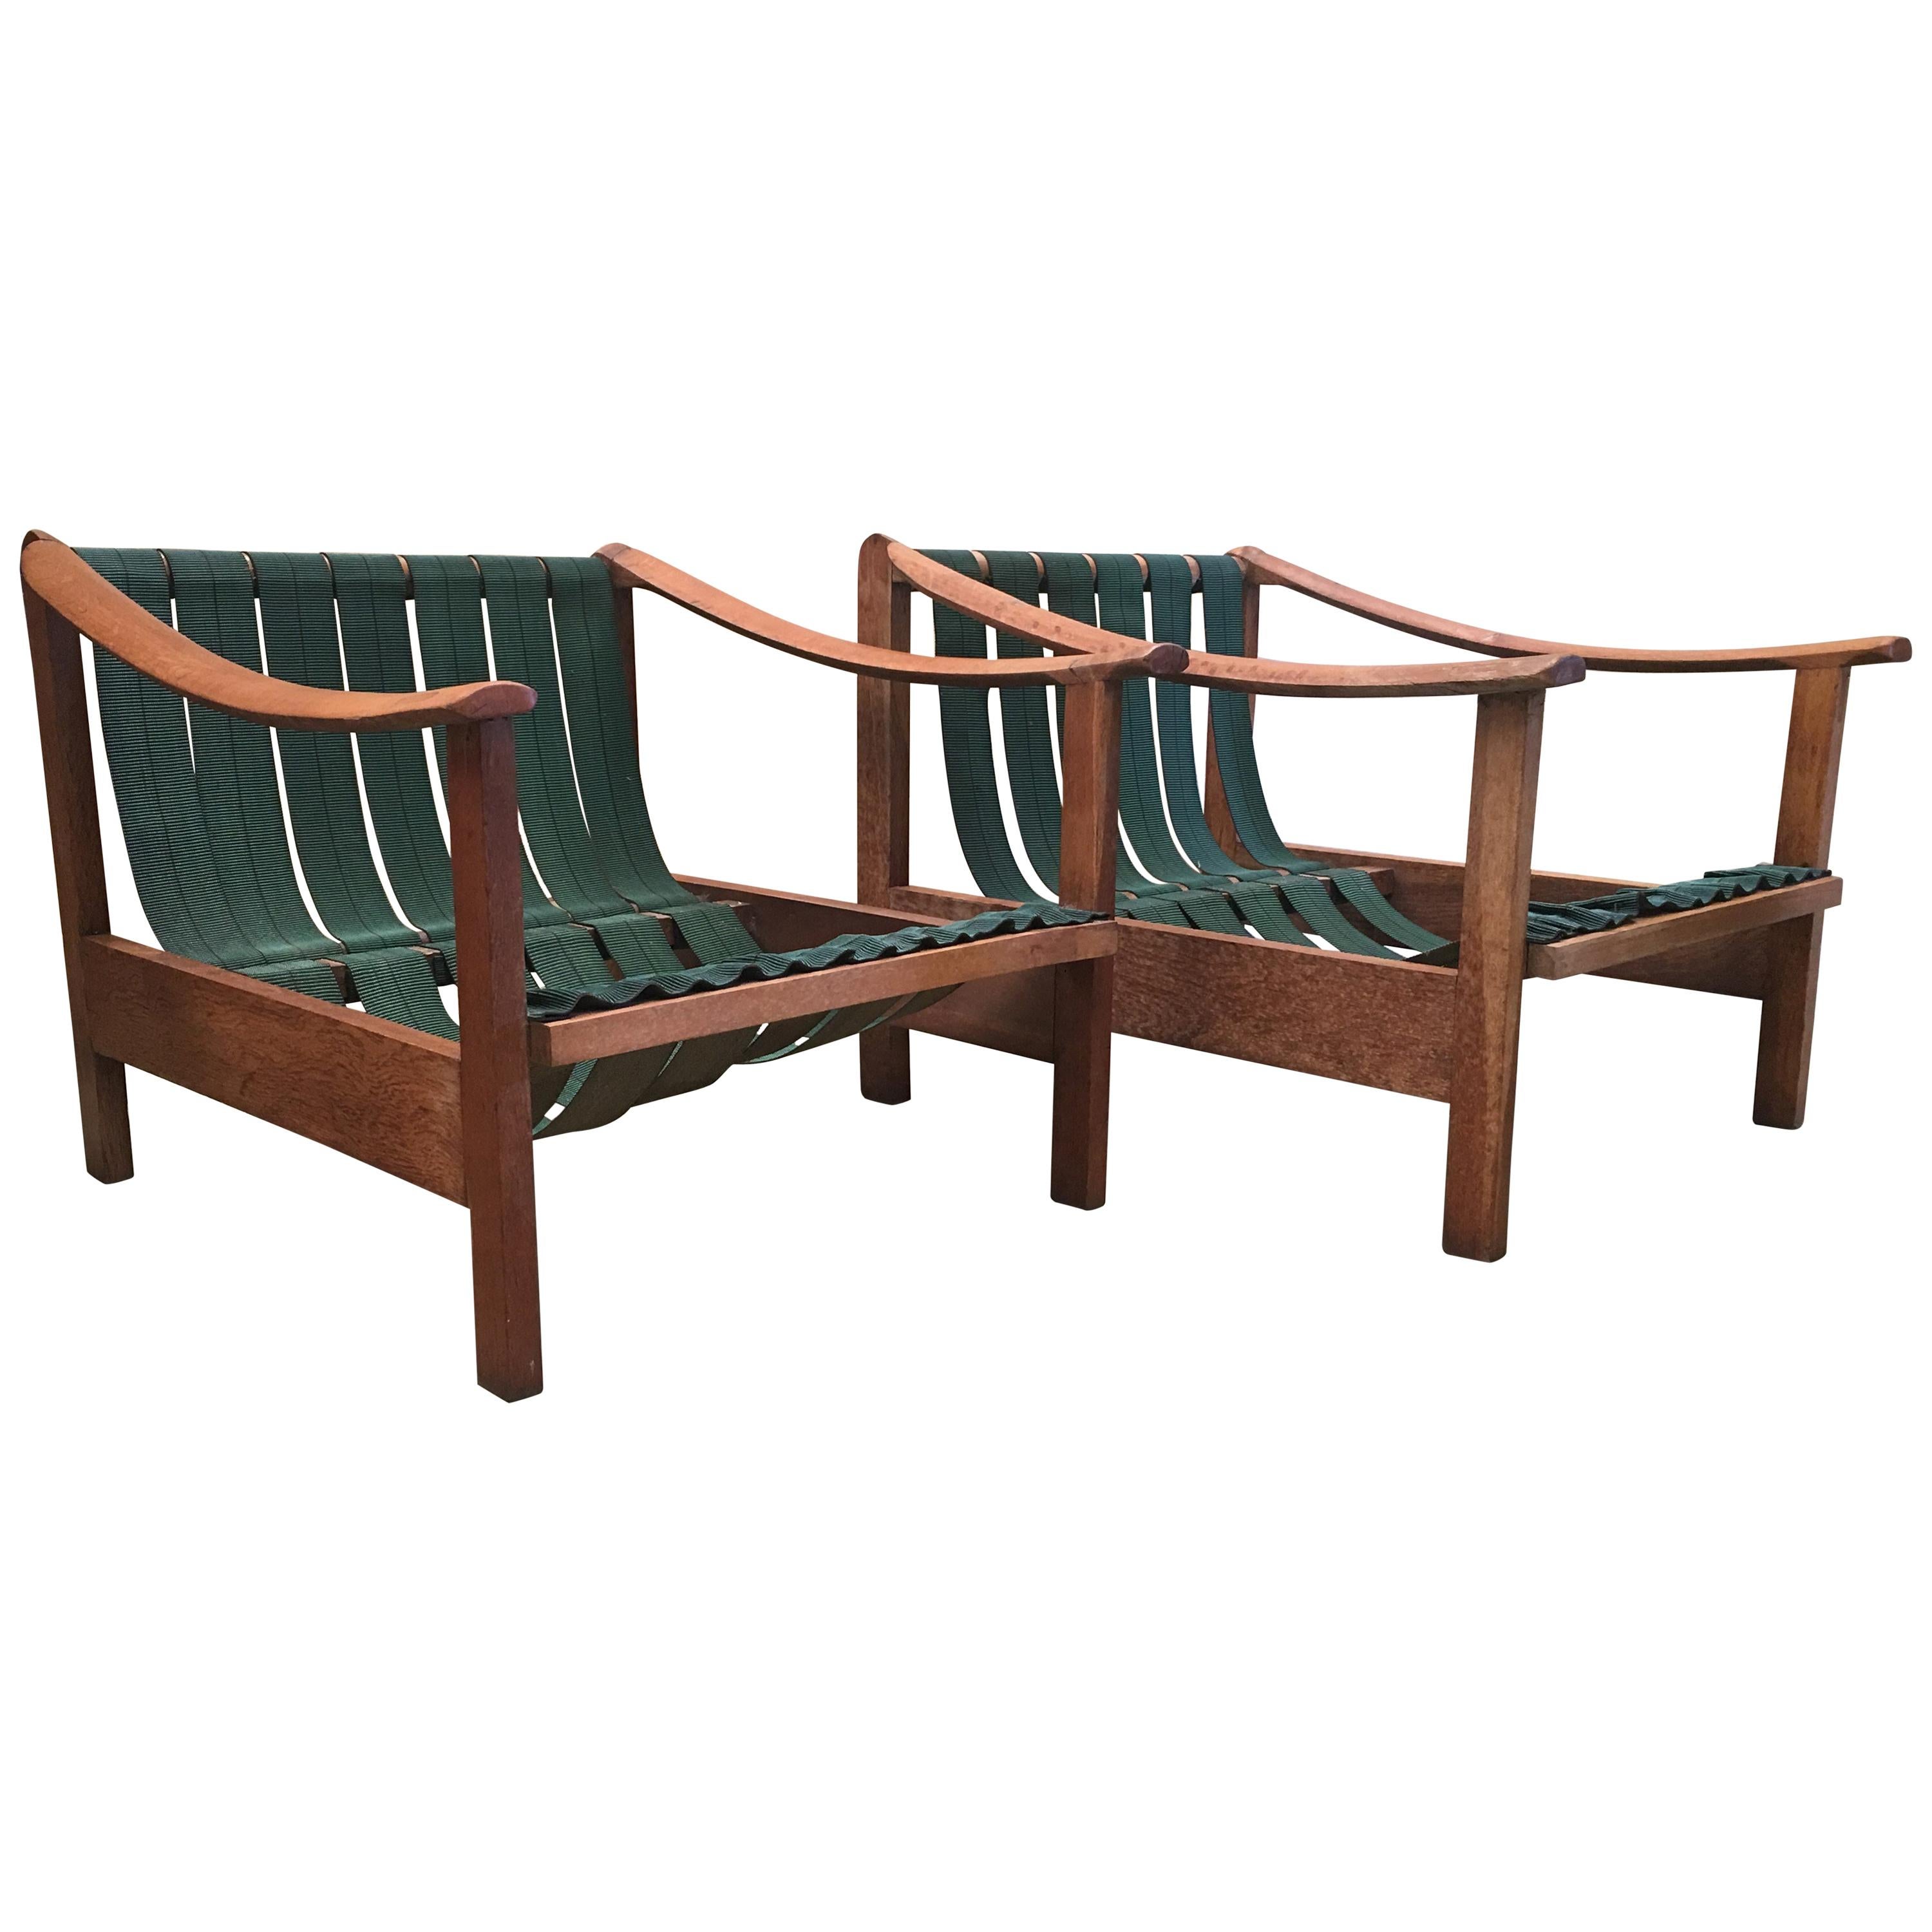 20th Century Vintage Danish Teak Armchairs with Straps and Cushions